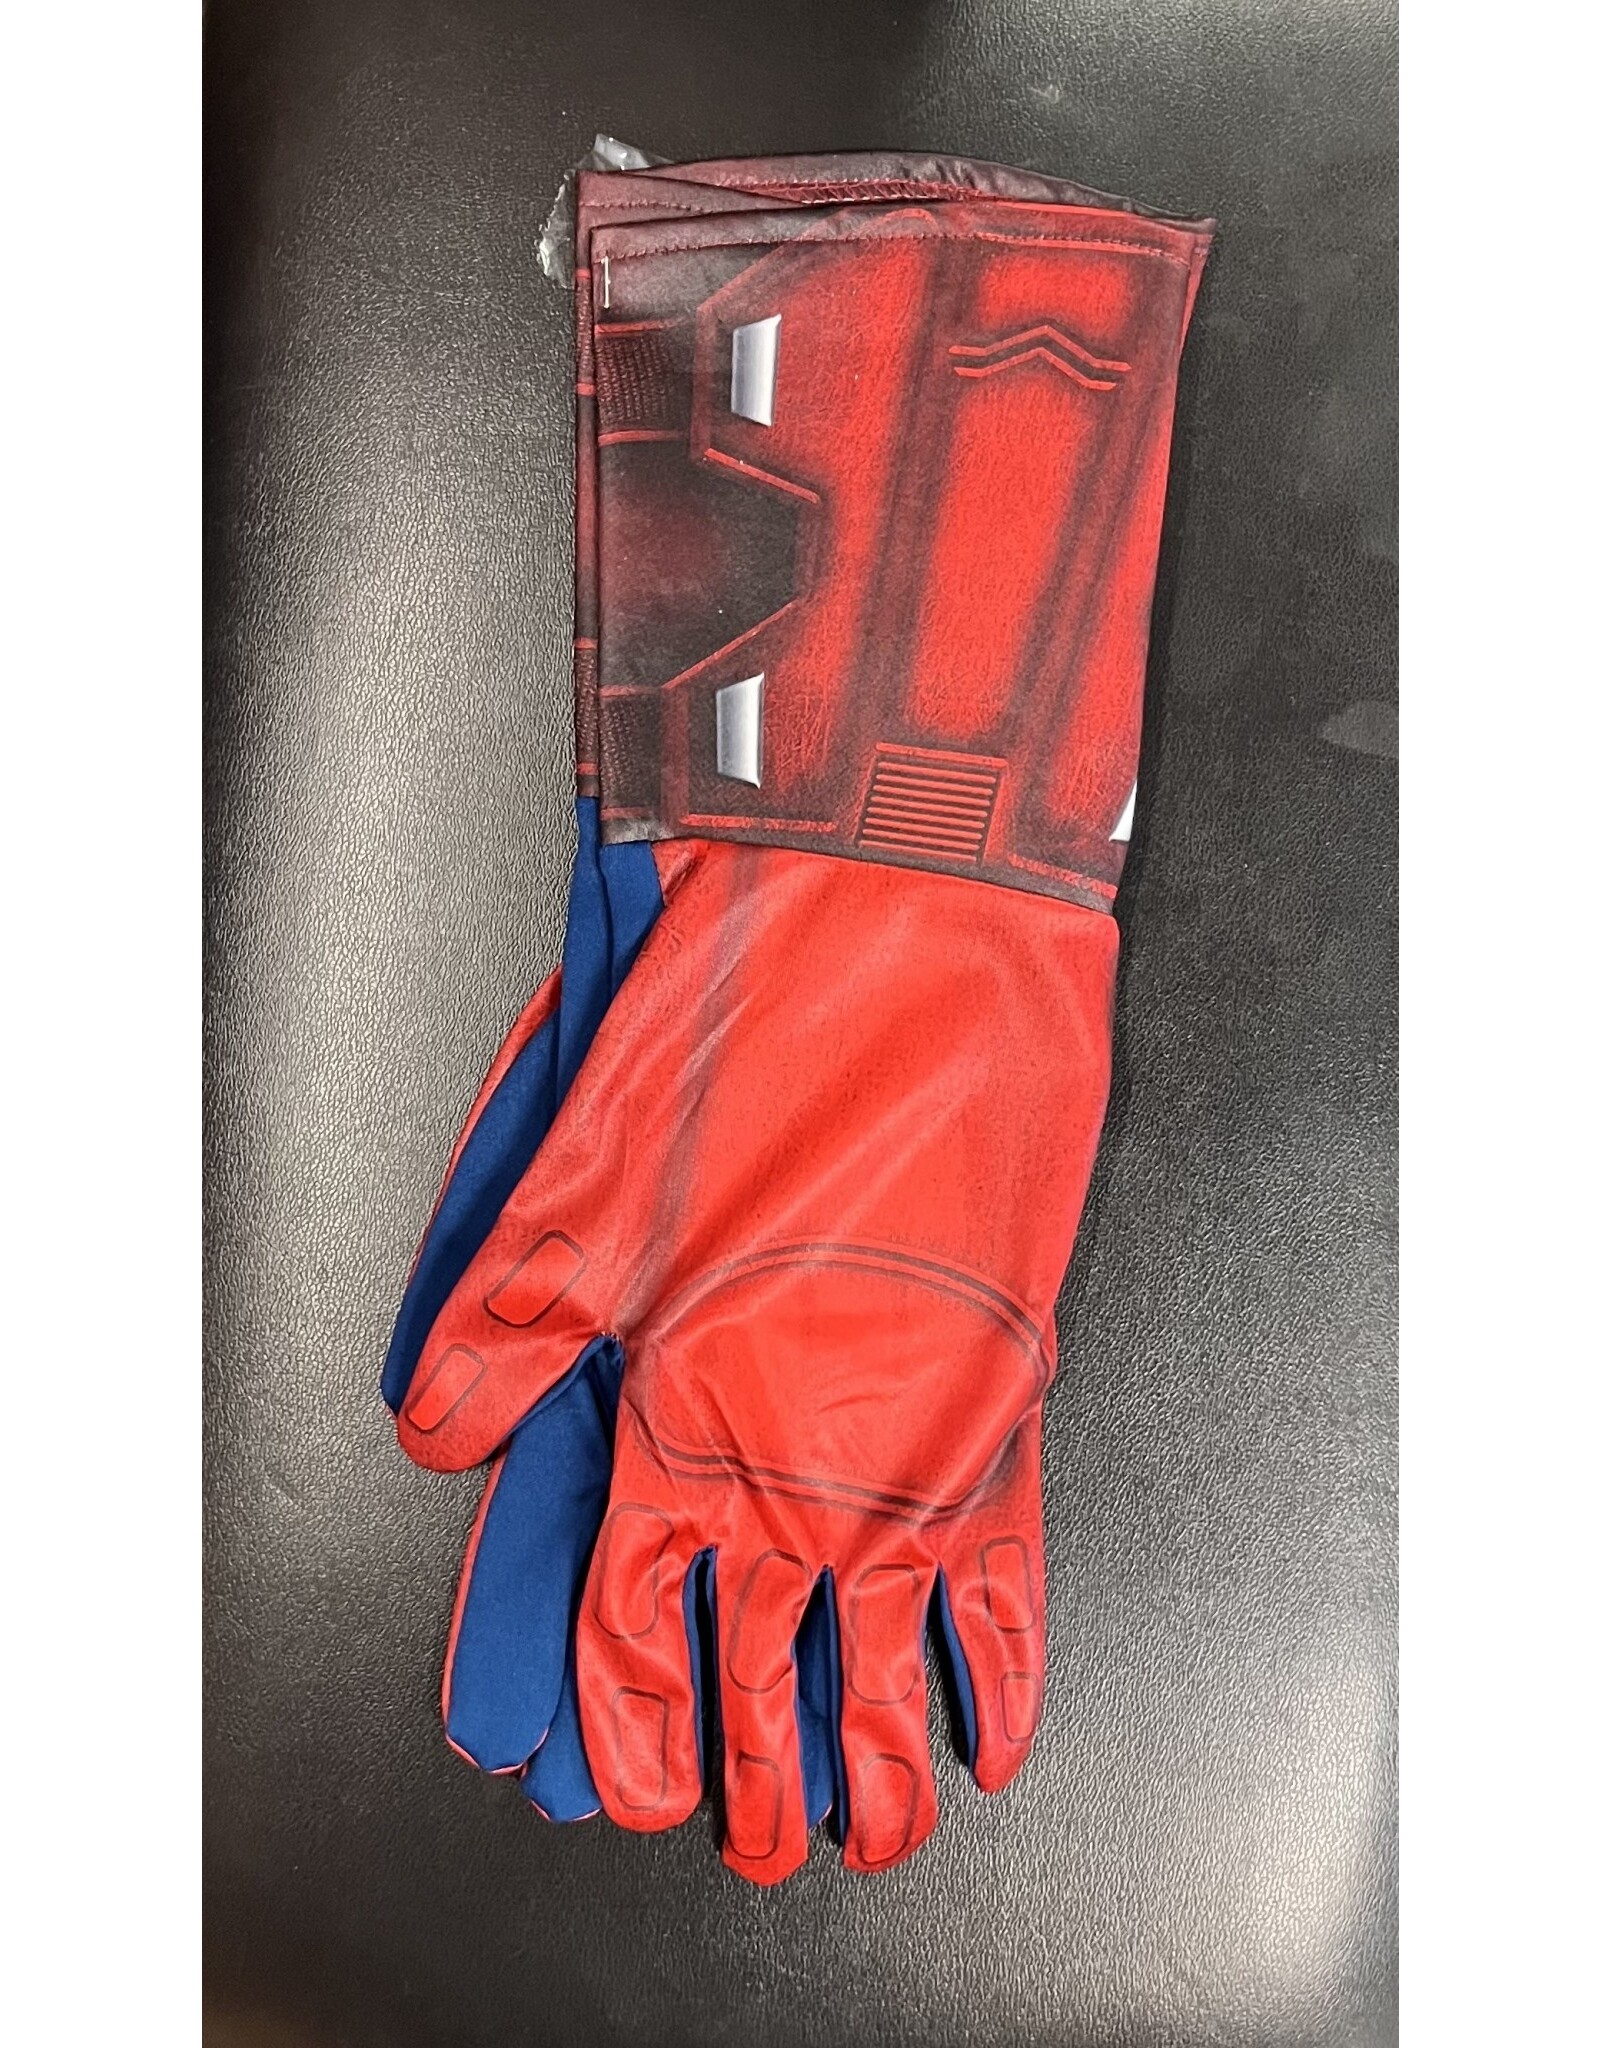 Disguise Captain America Deluxe Gloves